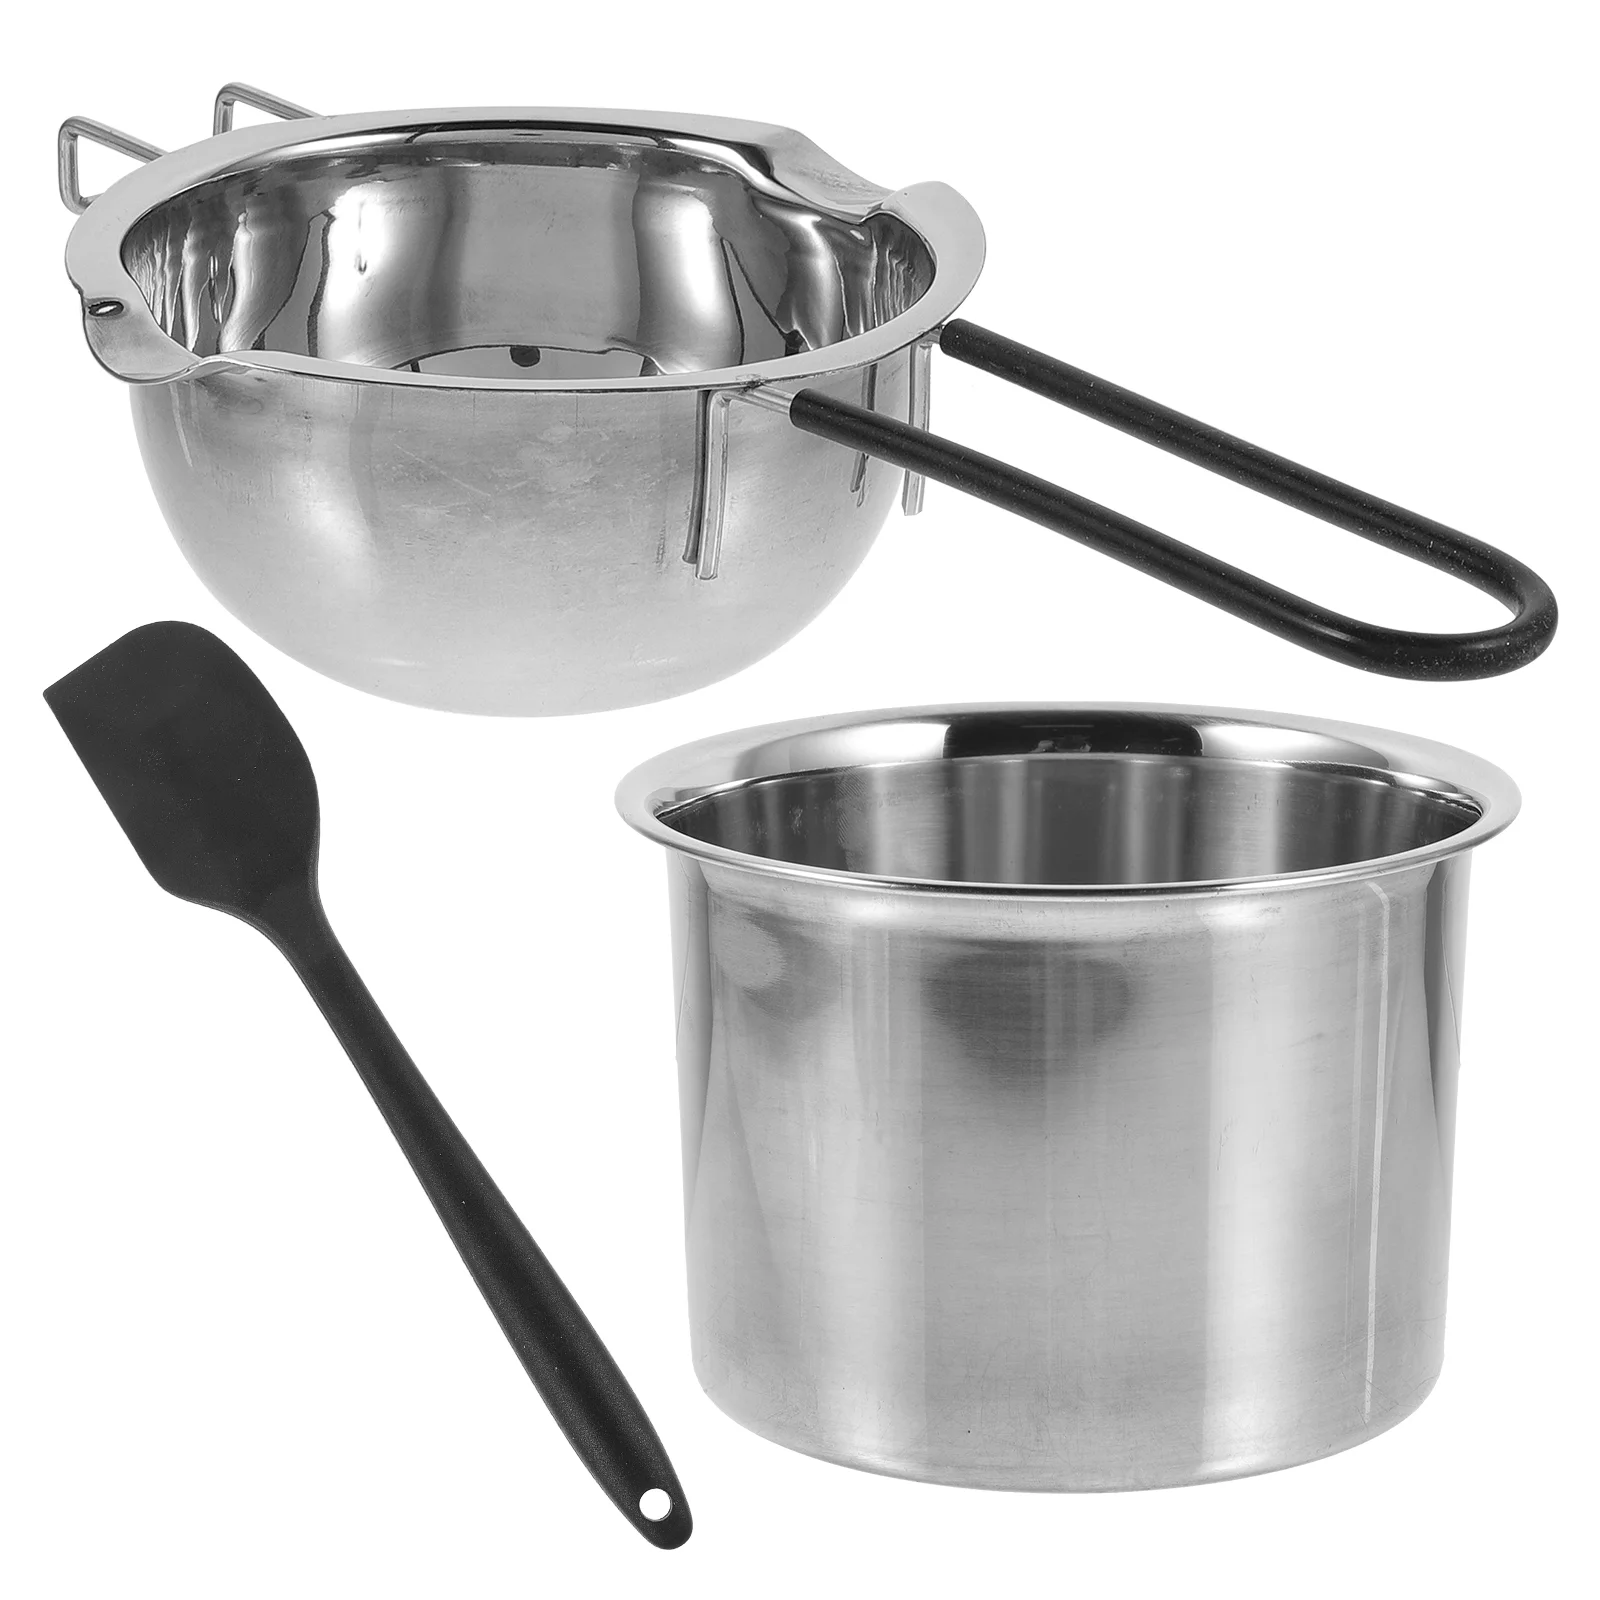 

1 Set Stainless Steel Wax Candy Melting Pot Chocolate Melting Pot For Candy Making Double Boiler Pot Melting Pot Butter Melter